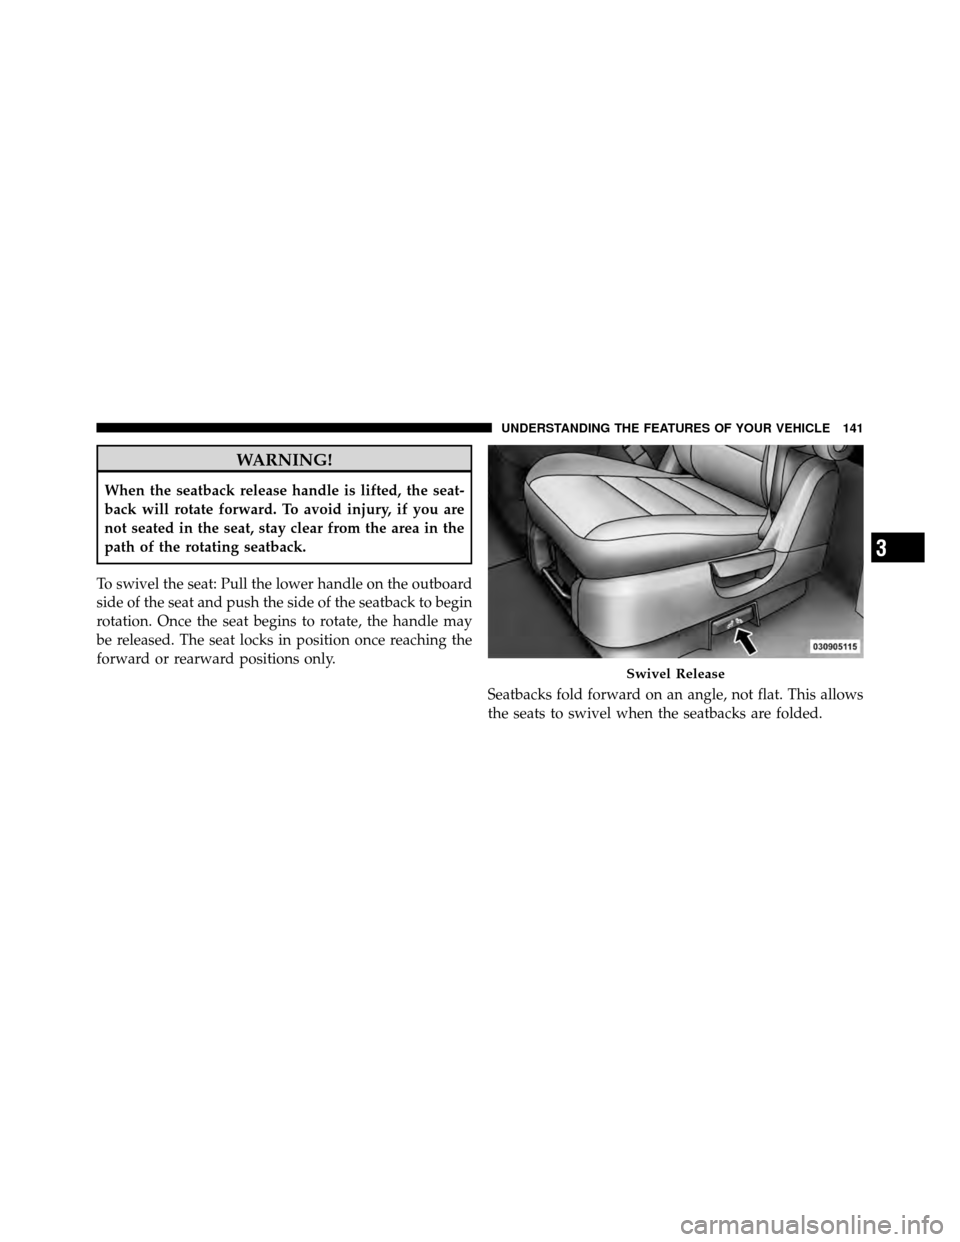 CHRYSLER TOWN AND COUNTRY 2010 5.G Owners Manual WARNING!
When the seatback release handle is lifted, the seat-
back will rotate forward. To avoid injury, if you are
not seated in the seat, stay clear from the area in the
path of the rotating seatba